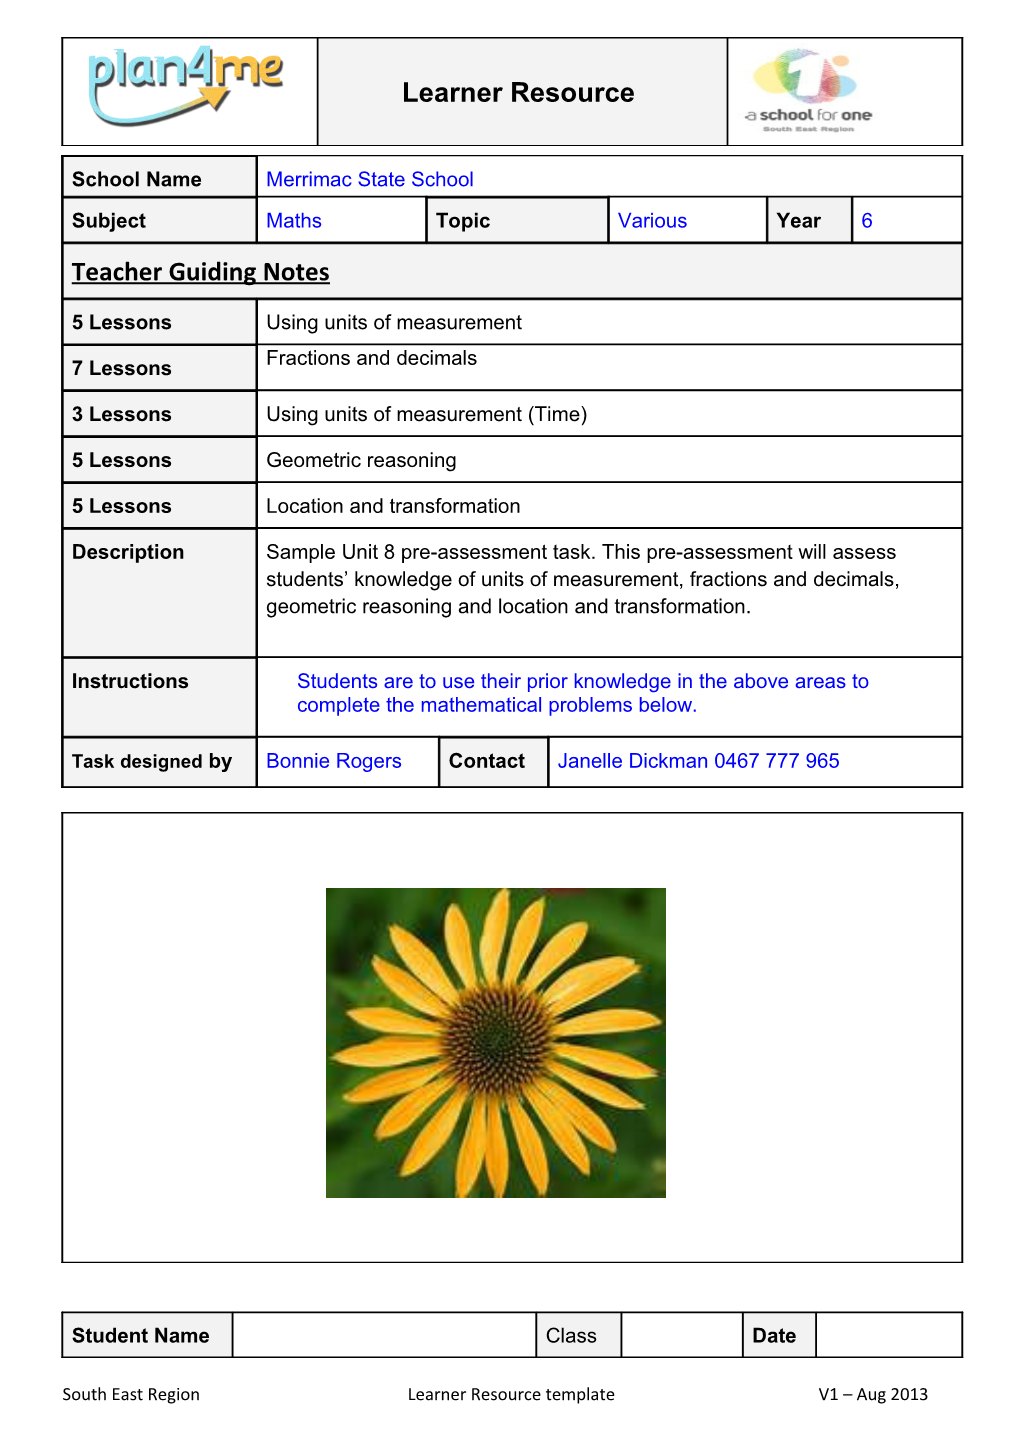 South East Region Learner Resource Template V1 Aug 2013